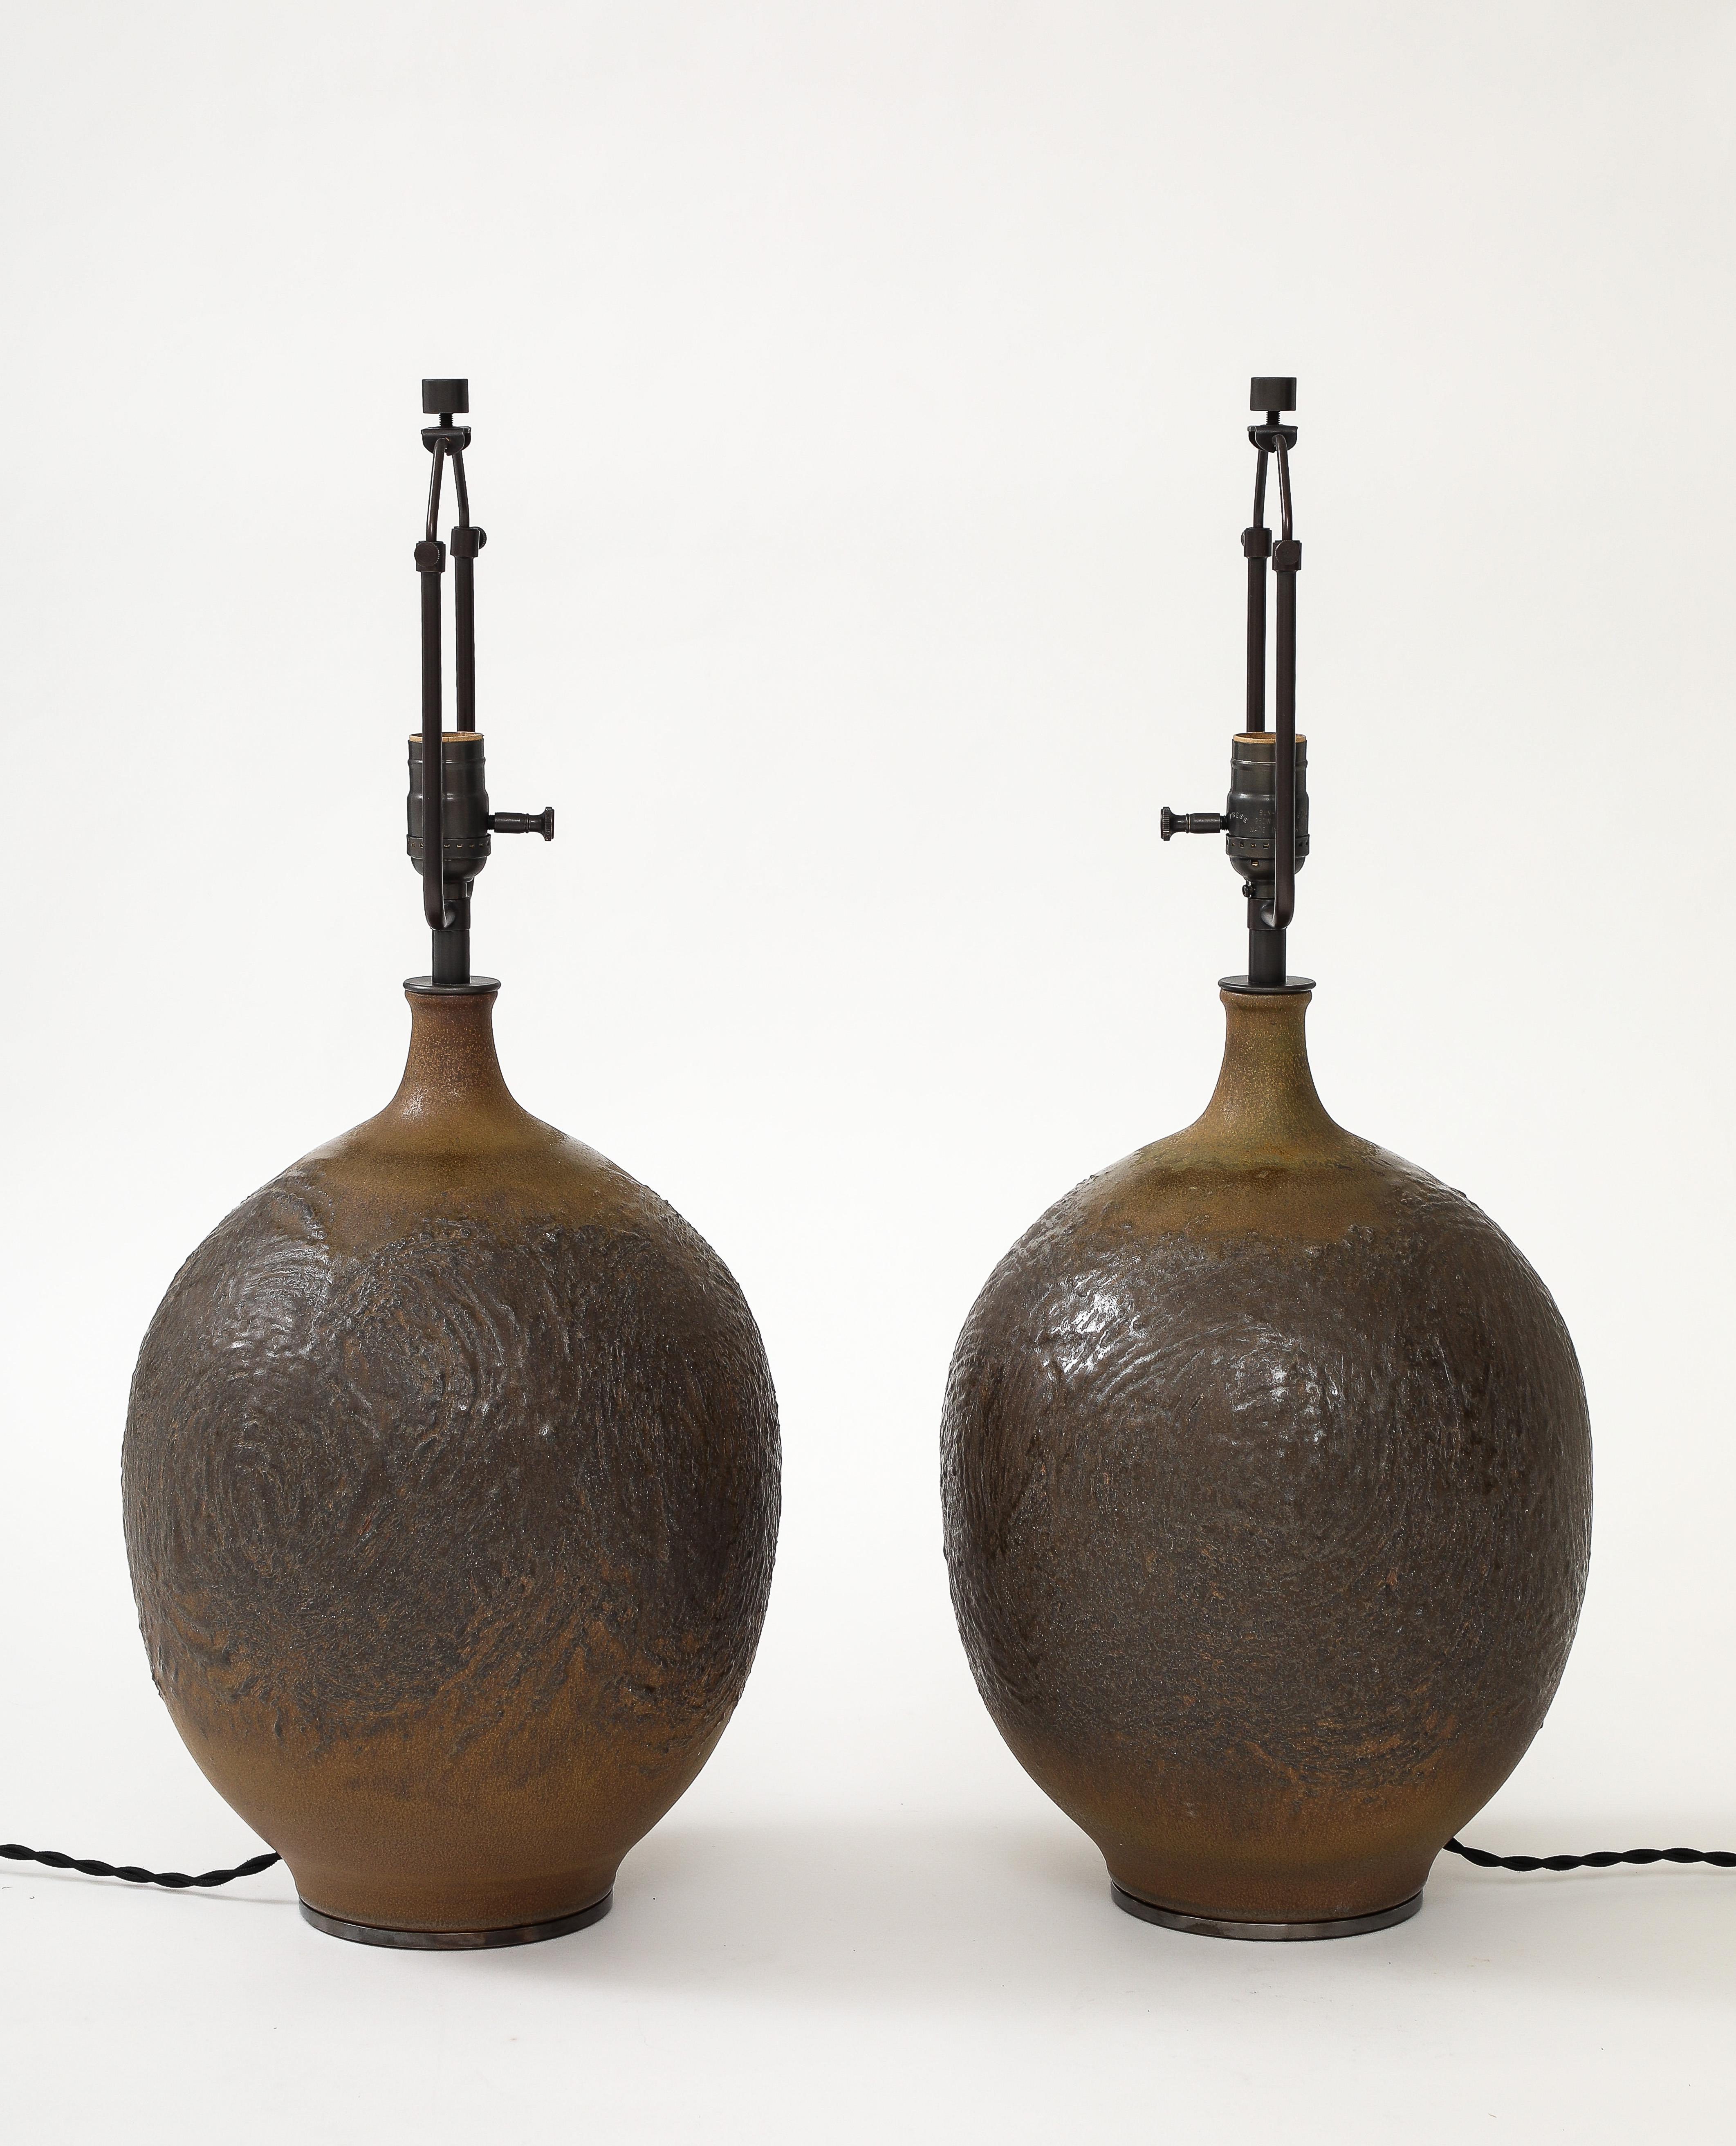 American Pair of Glazed Ceramic Lamps by Design Technics, United States, c. 1950 For Sale